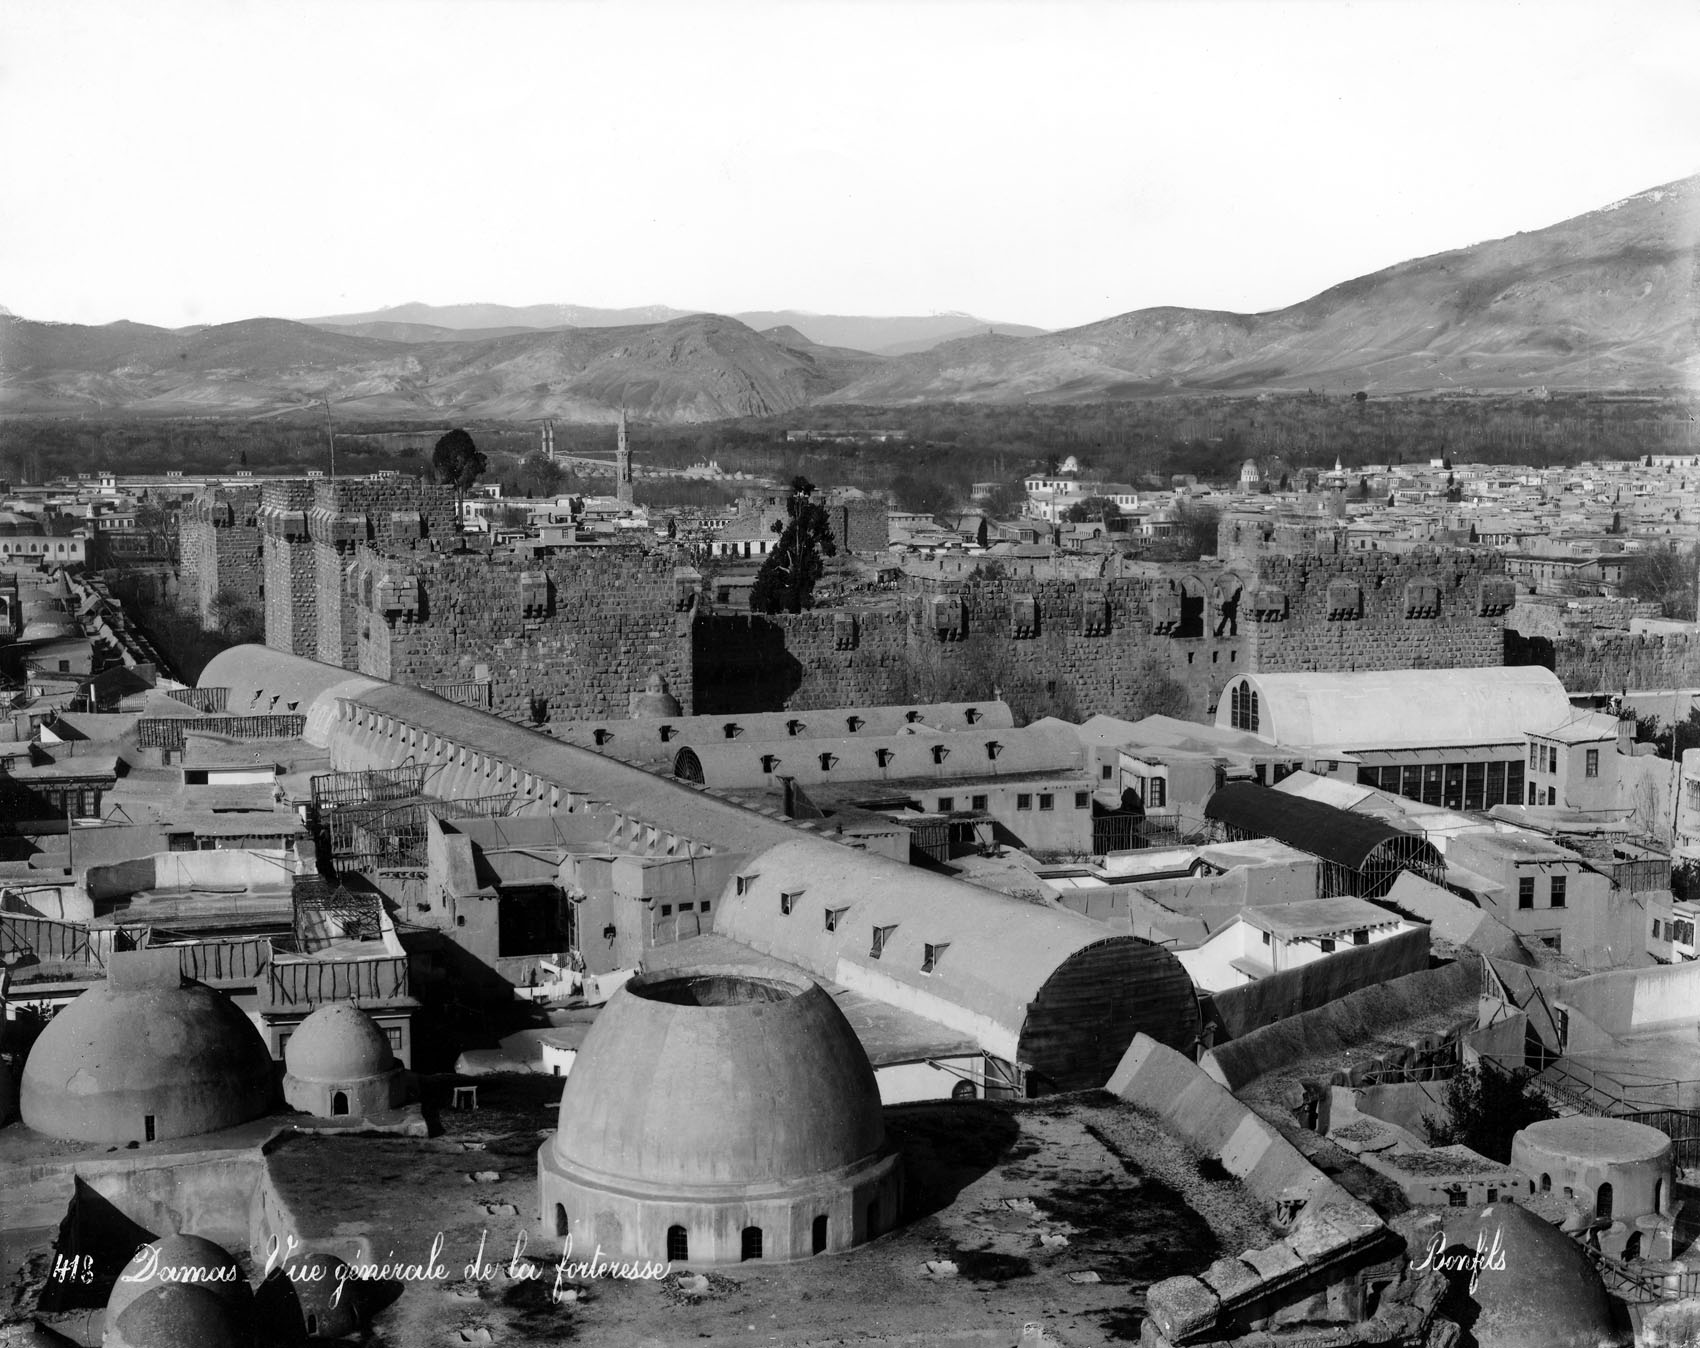 General view with Suq al-Hamidiyya in the foreground 